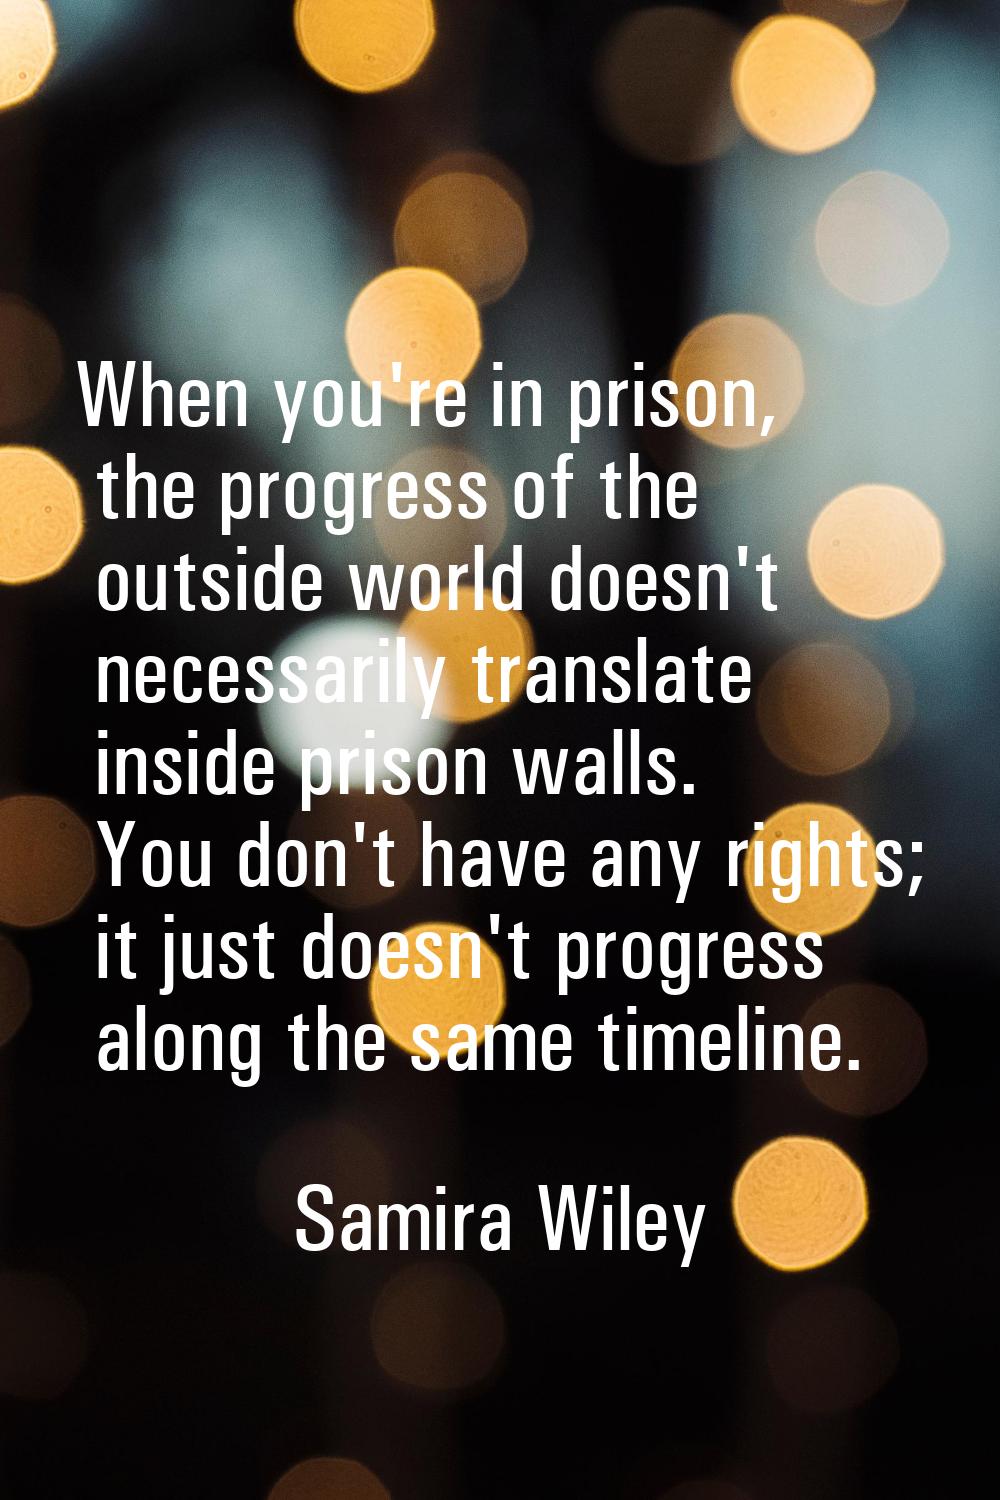 When you're in prison, the progress of the outside world doesn't necessarily translate inside priso